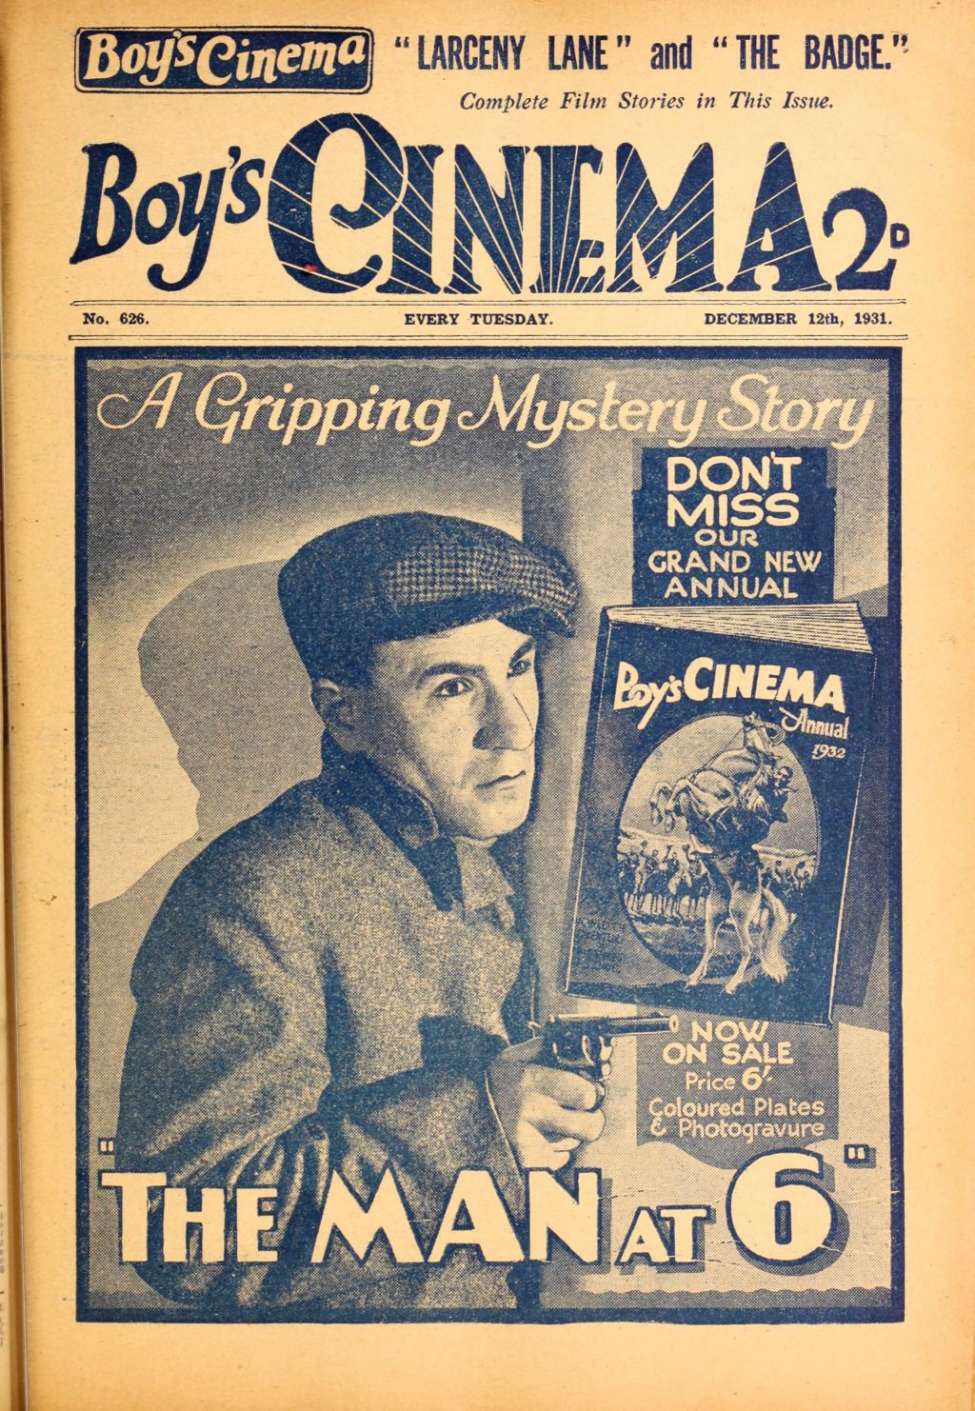 Comic Book Cover For Boy's Cinema 626 - The Man at 6 - Gerald Rawlinson